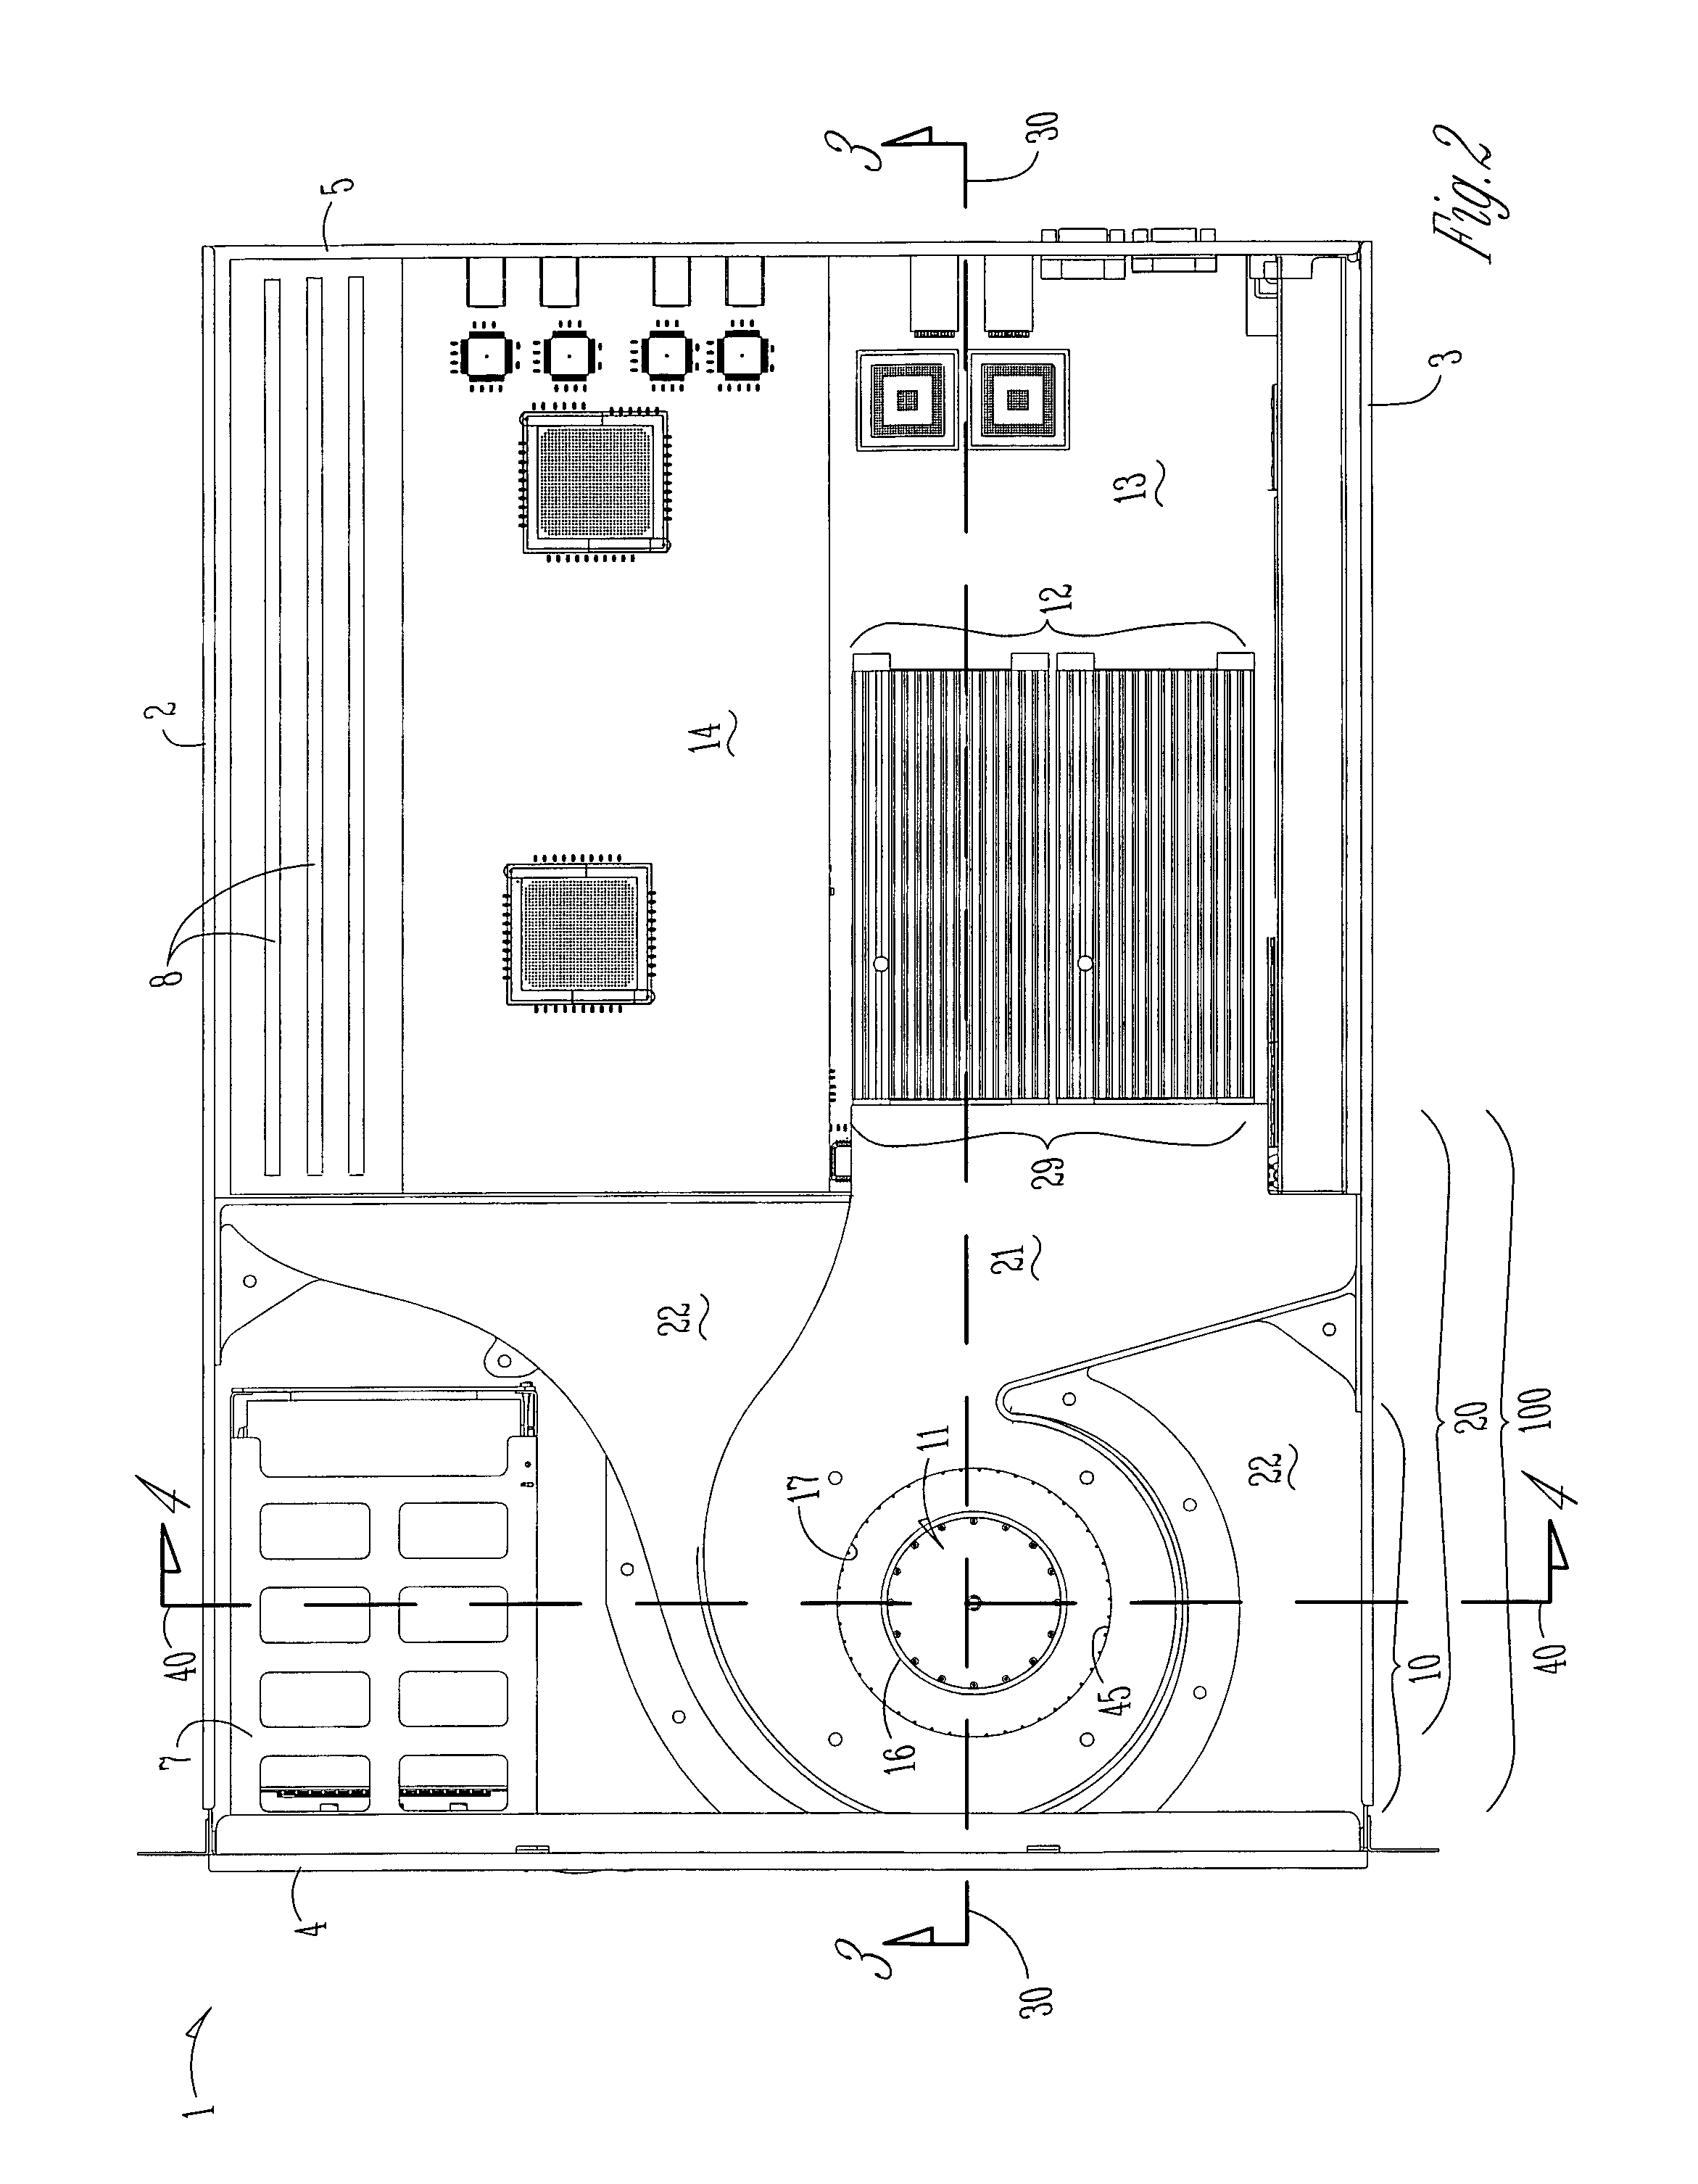 Baffles for high capacity air-cooling systems for electronics apparatus